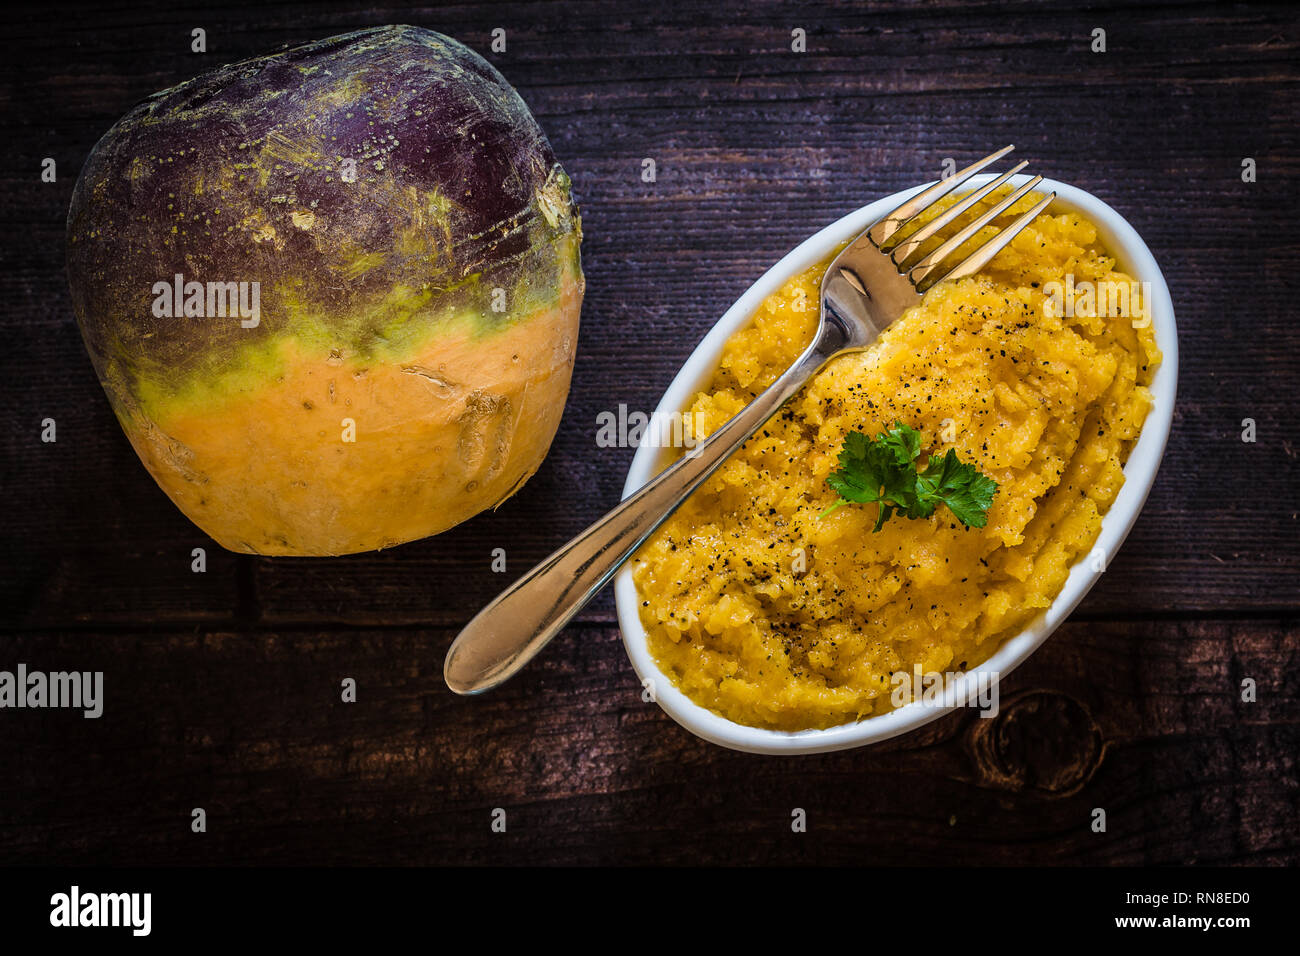 Healthy root vegetable Swede whole, with a bowl of Swede cooked and mashed in a white bowl. This vegetable is high in fibre. Stock Photo